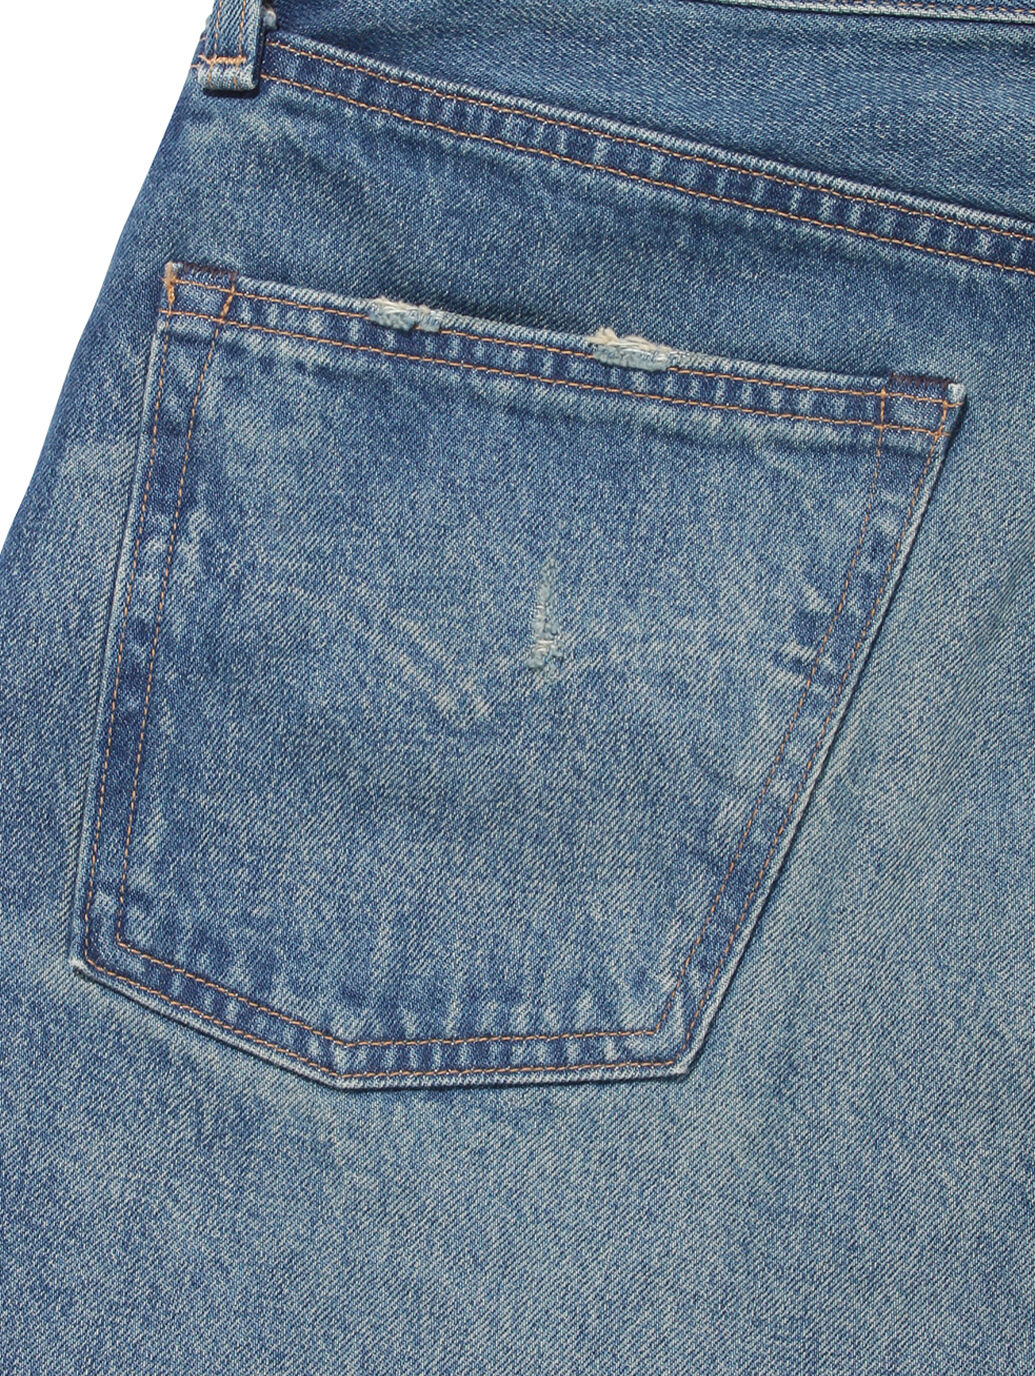 LEVI'S® MADE&CRAFTED®551 Z VINTG STRGHT YOTTO MADE IN JAPAN